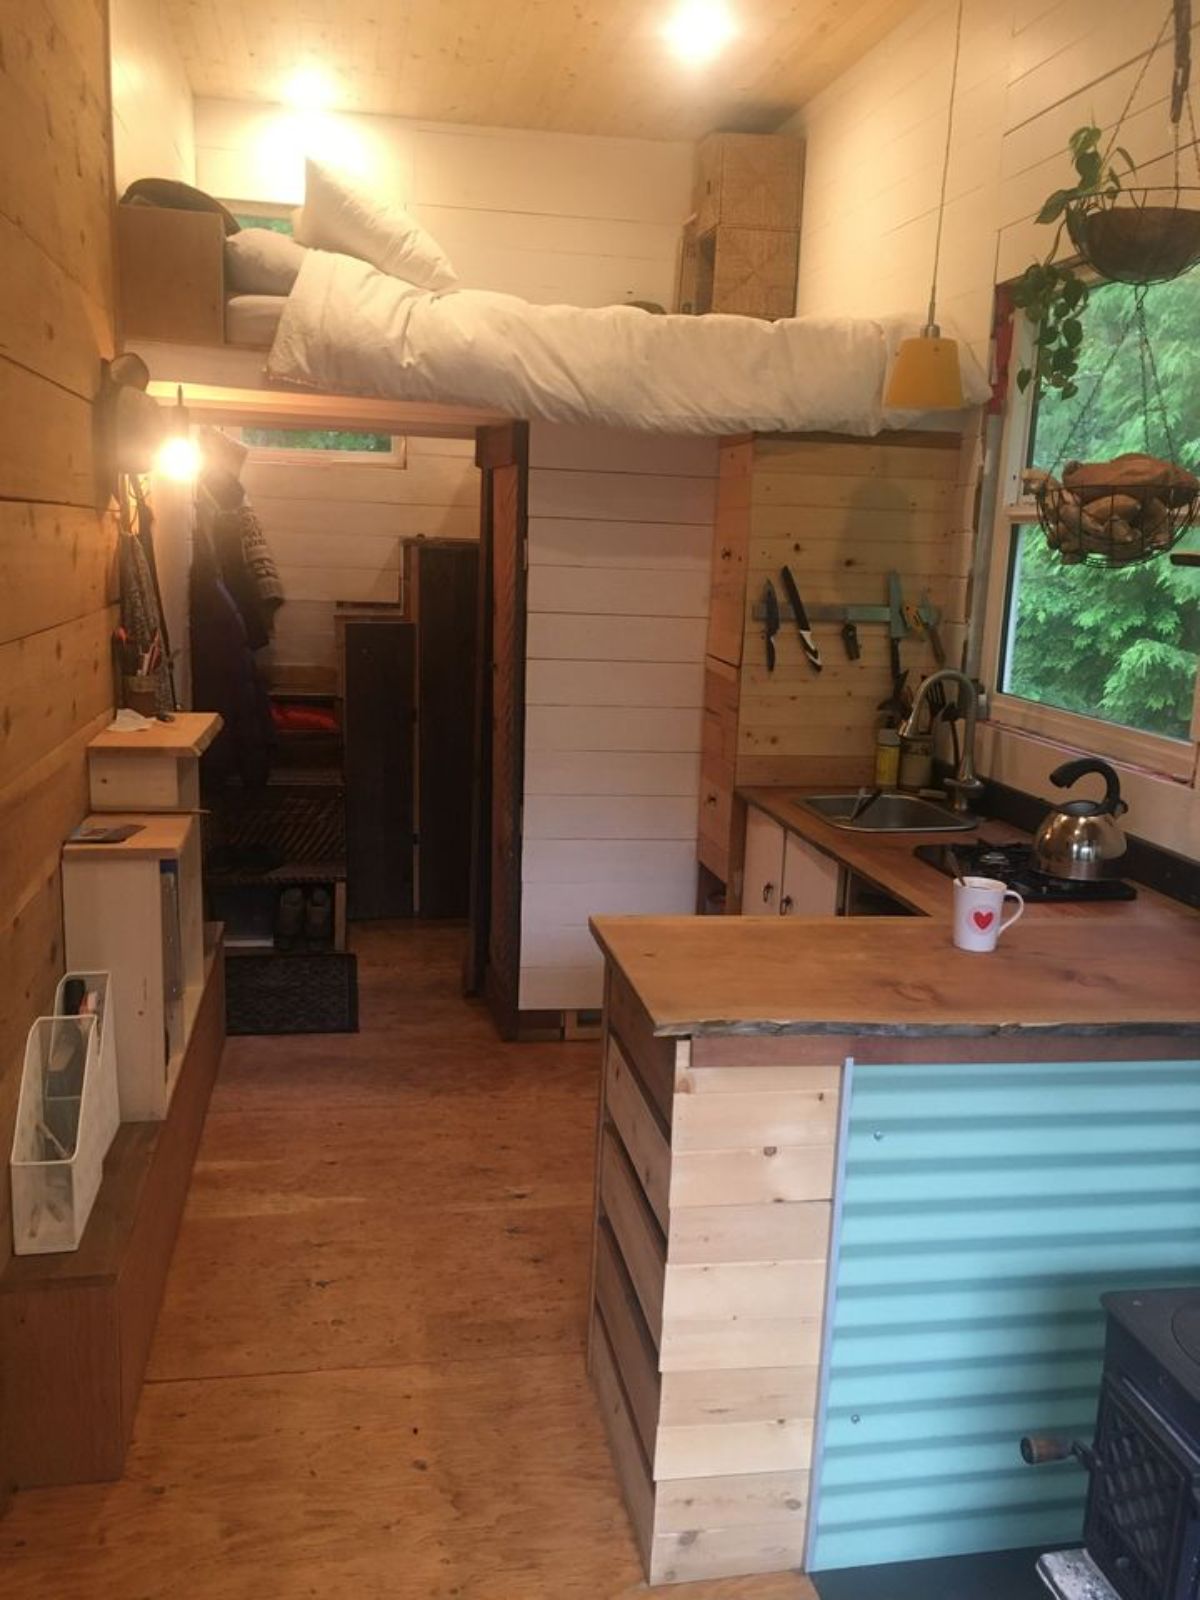 Full view of Cozy 24' Four Season Tiny House from inside